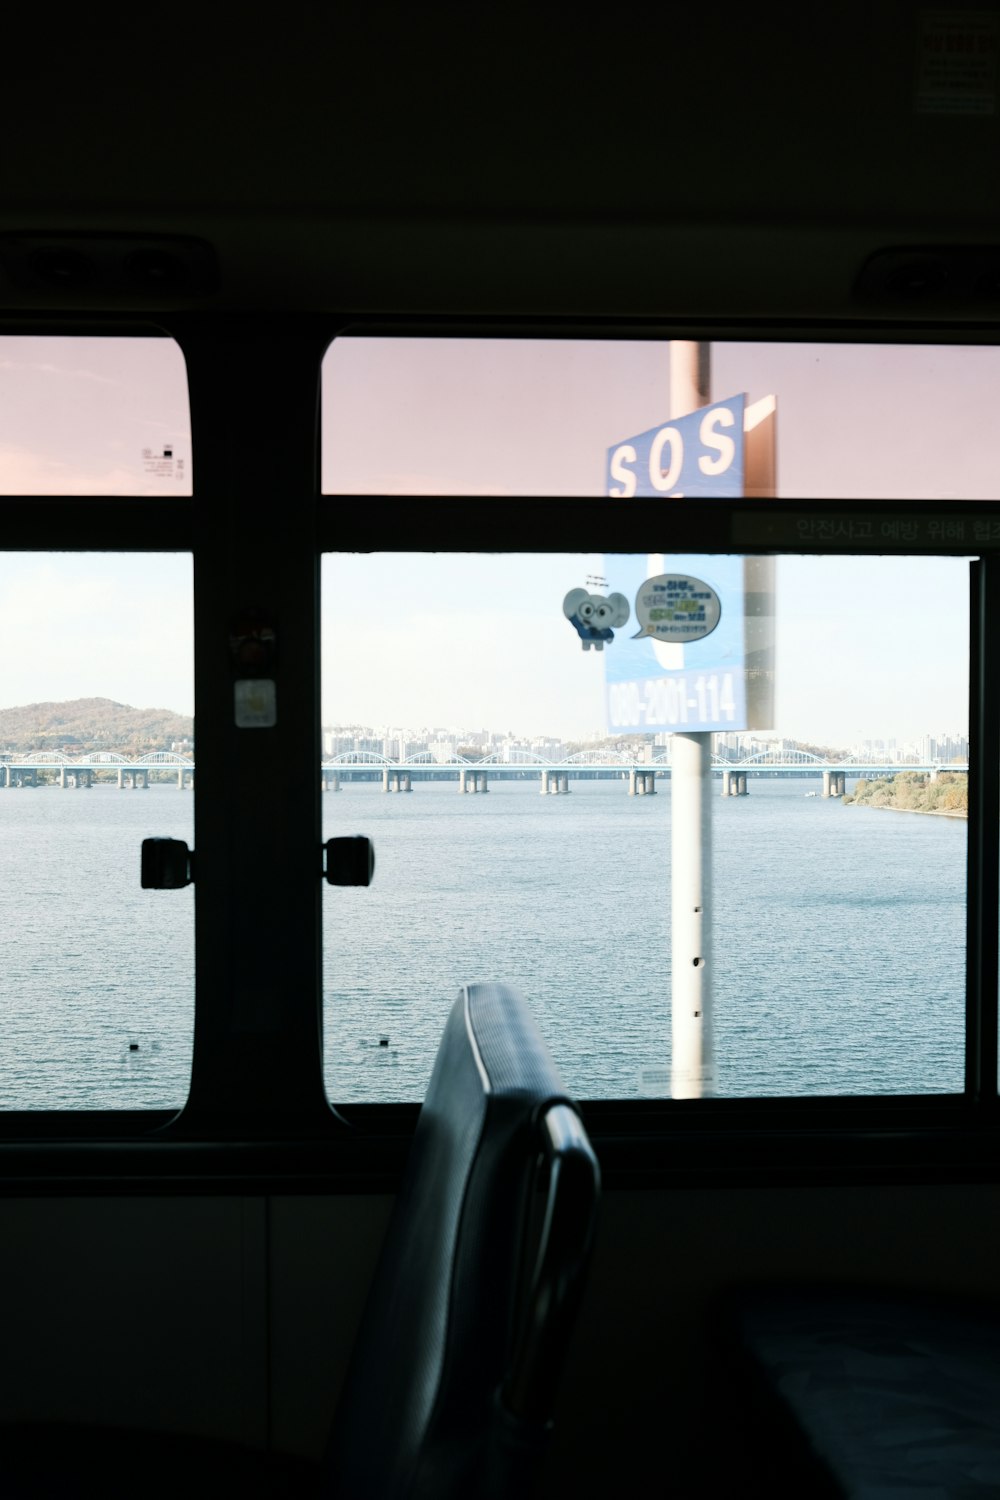 a view of a body of water from inside a bus